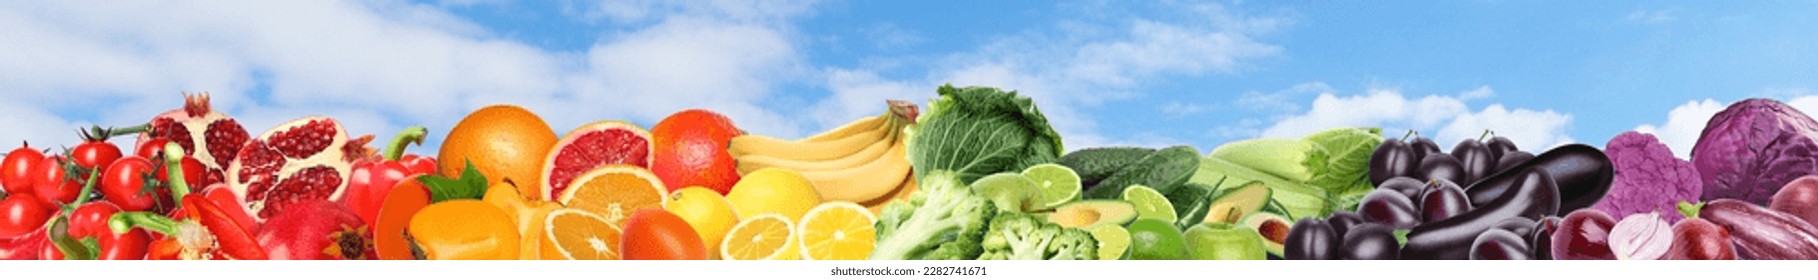 Many different fresh fruits and vegetables against blue sky with clouds. Banner design - Shutterstock ID 2282741671